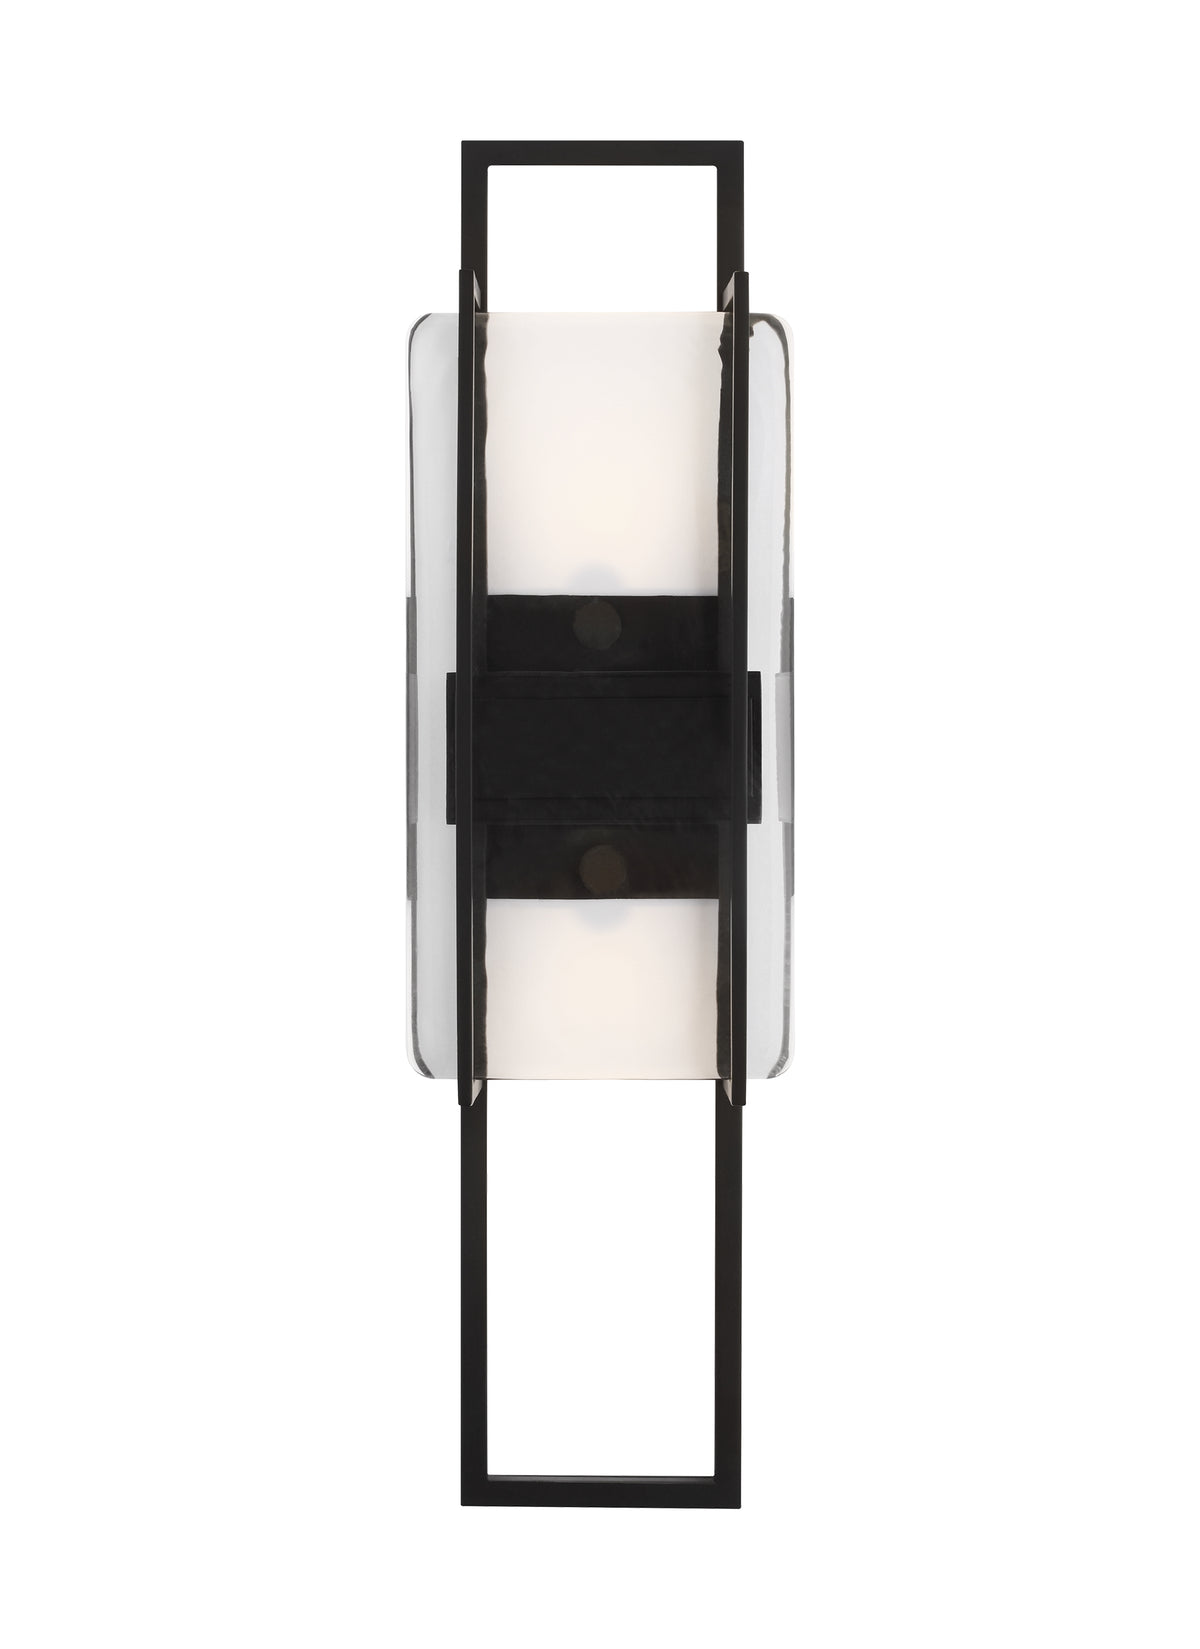 Tech Lighting, Duelle Wall Sconce, Nightshade Black 